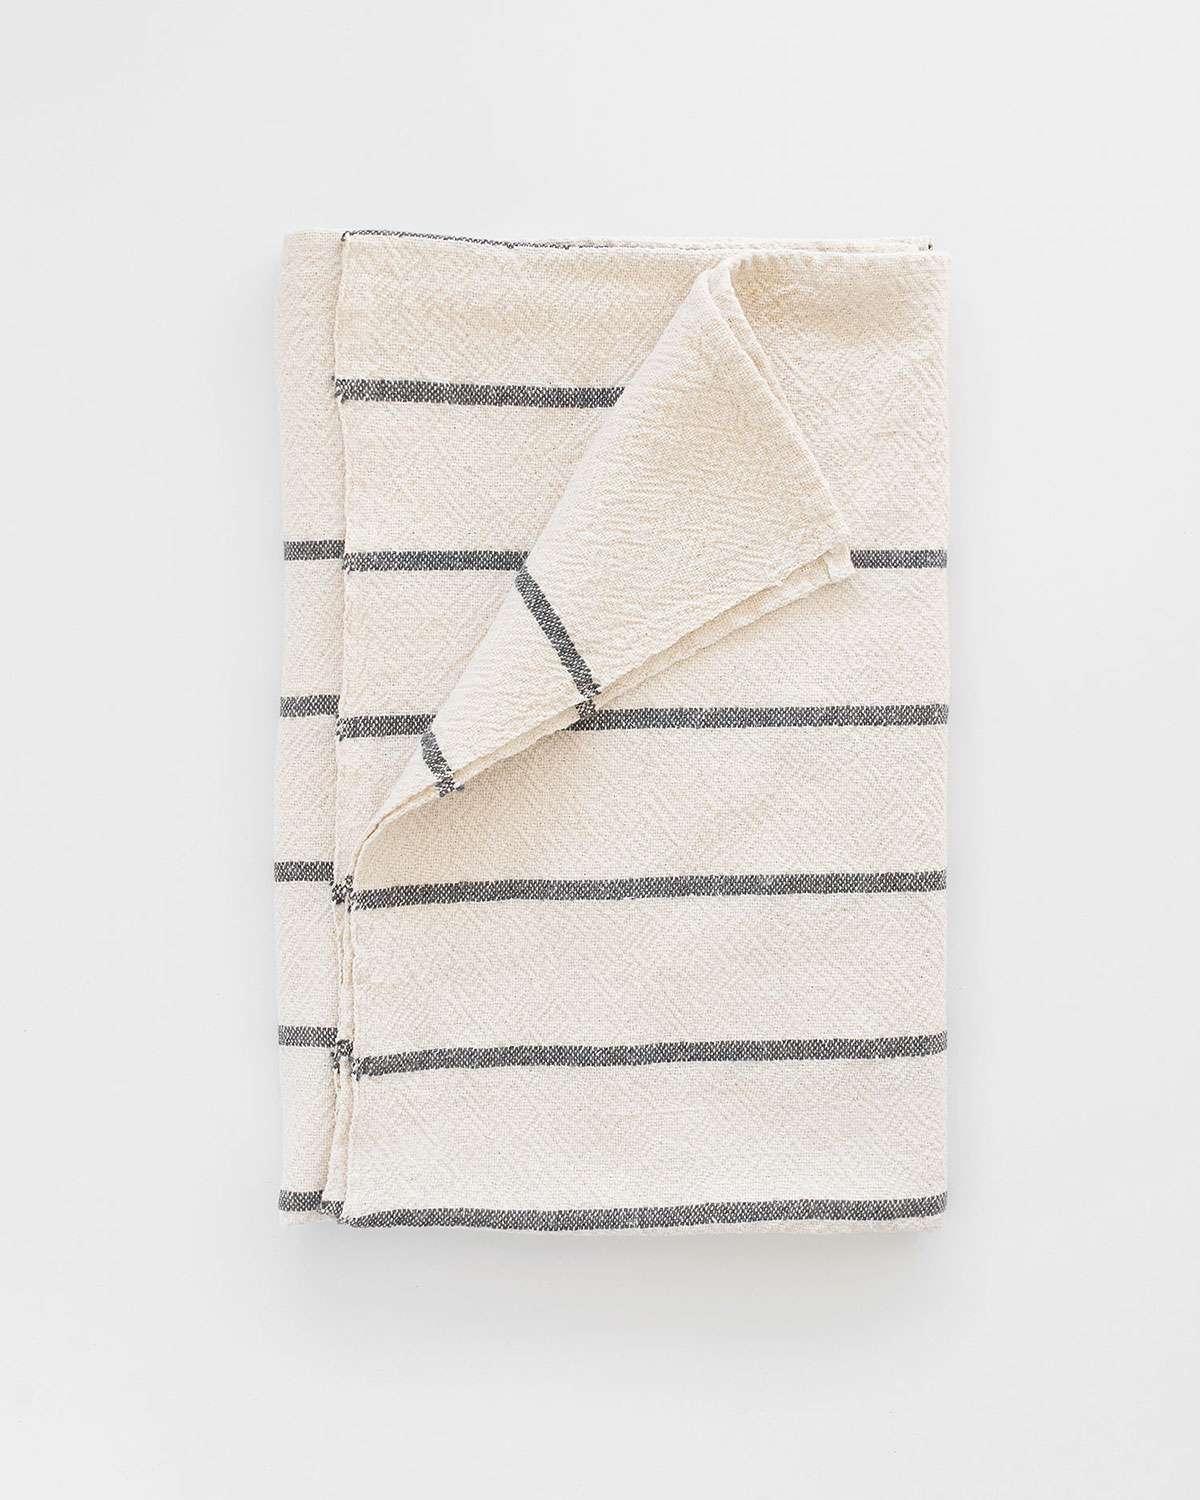 BHW - Large Country Towel - Stripes Throughout - Charcoal